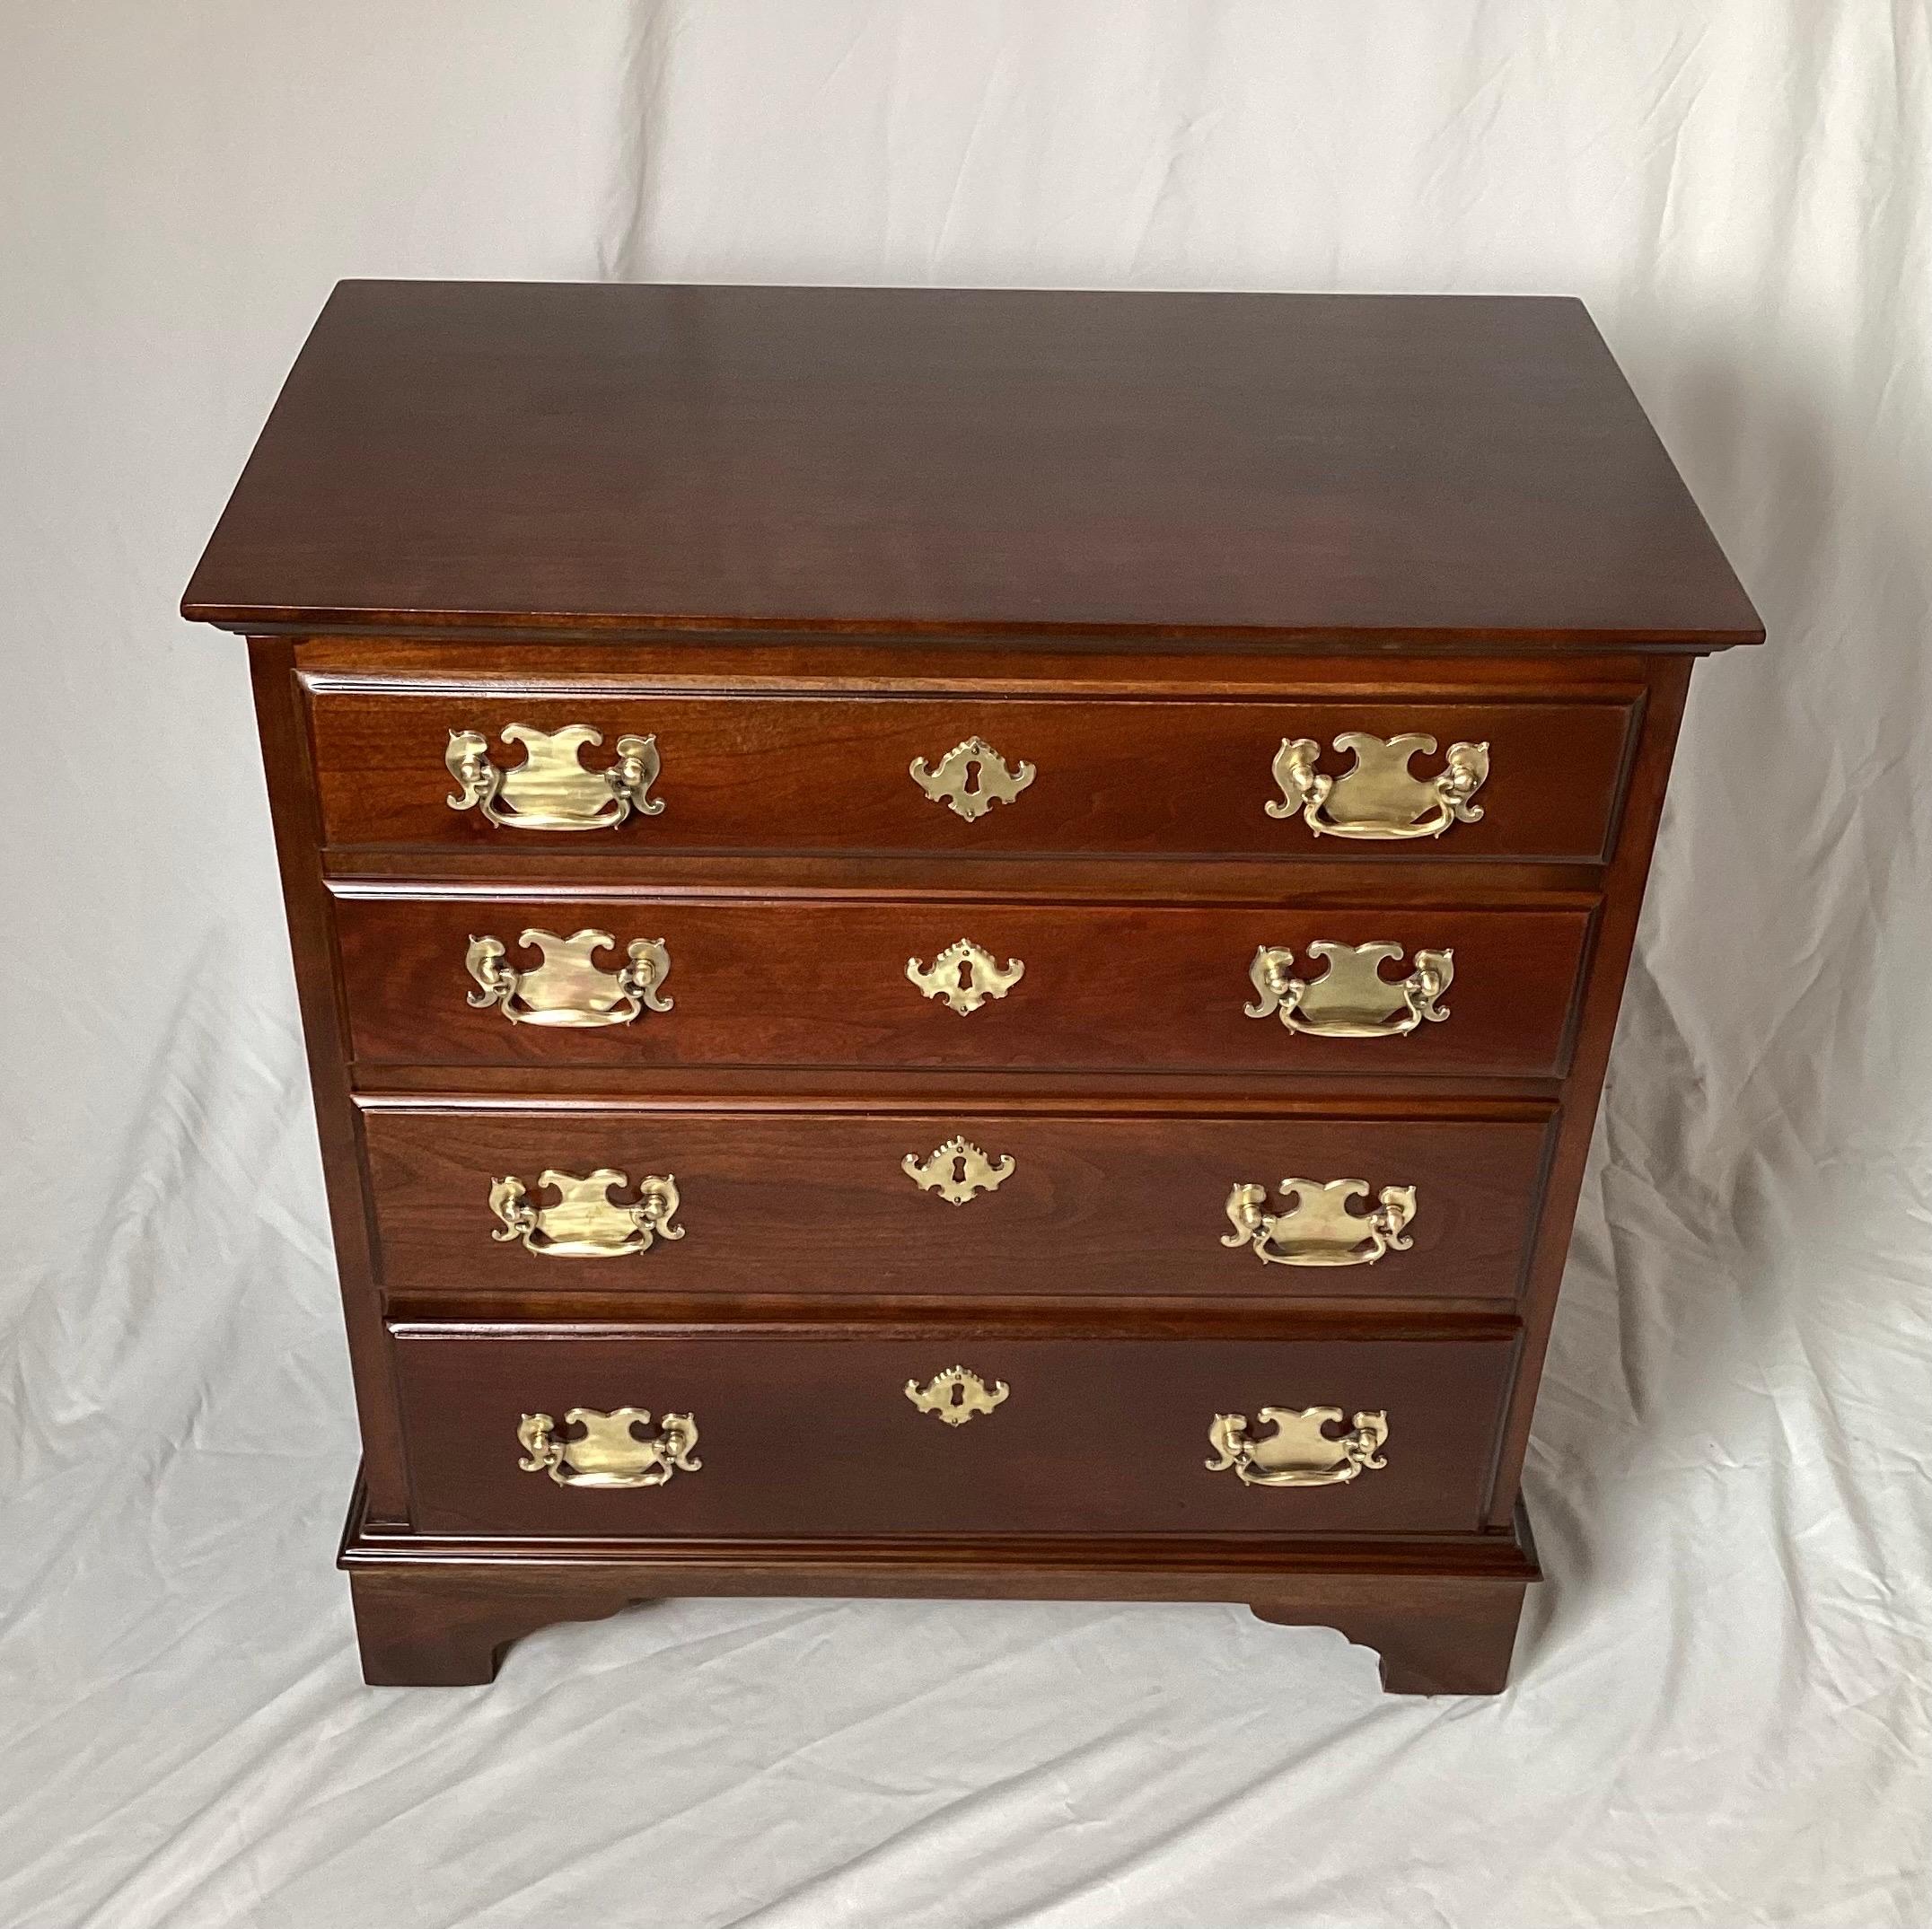 Solid Pennsylvanian cherry diminutive bachelors chest with brass handles. The warm dark reddish brown wood with burnished brass handles. The back is a solid beveled panel of polished and finished wood. Pennsylvania house was finely made solid wood